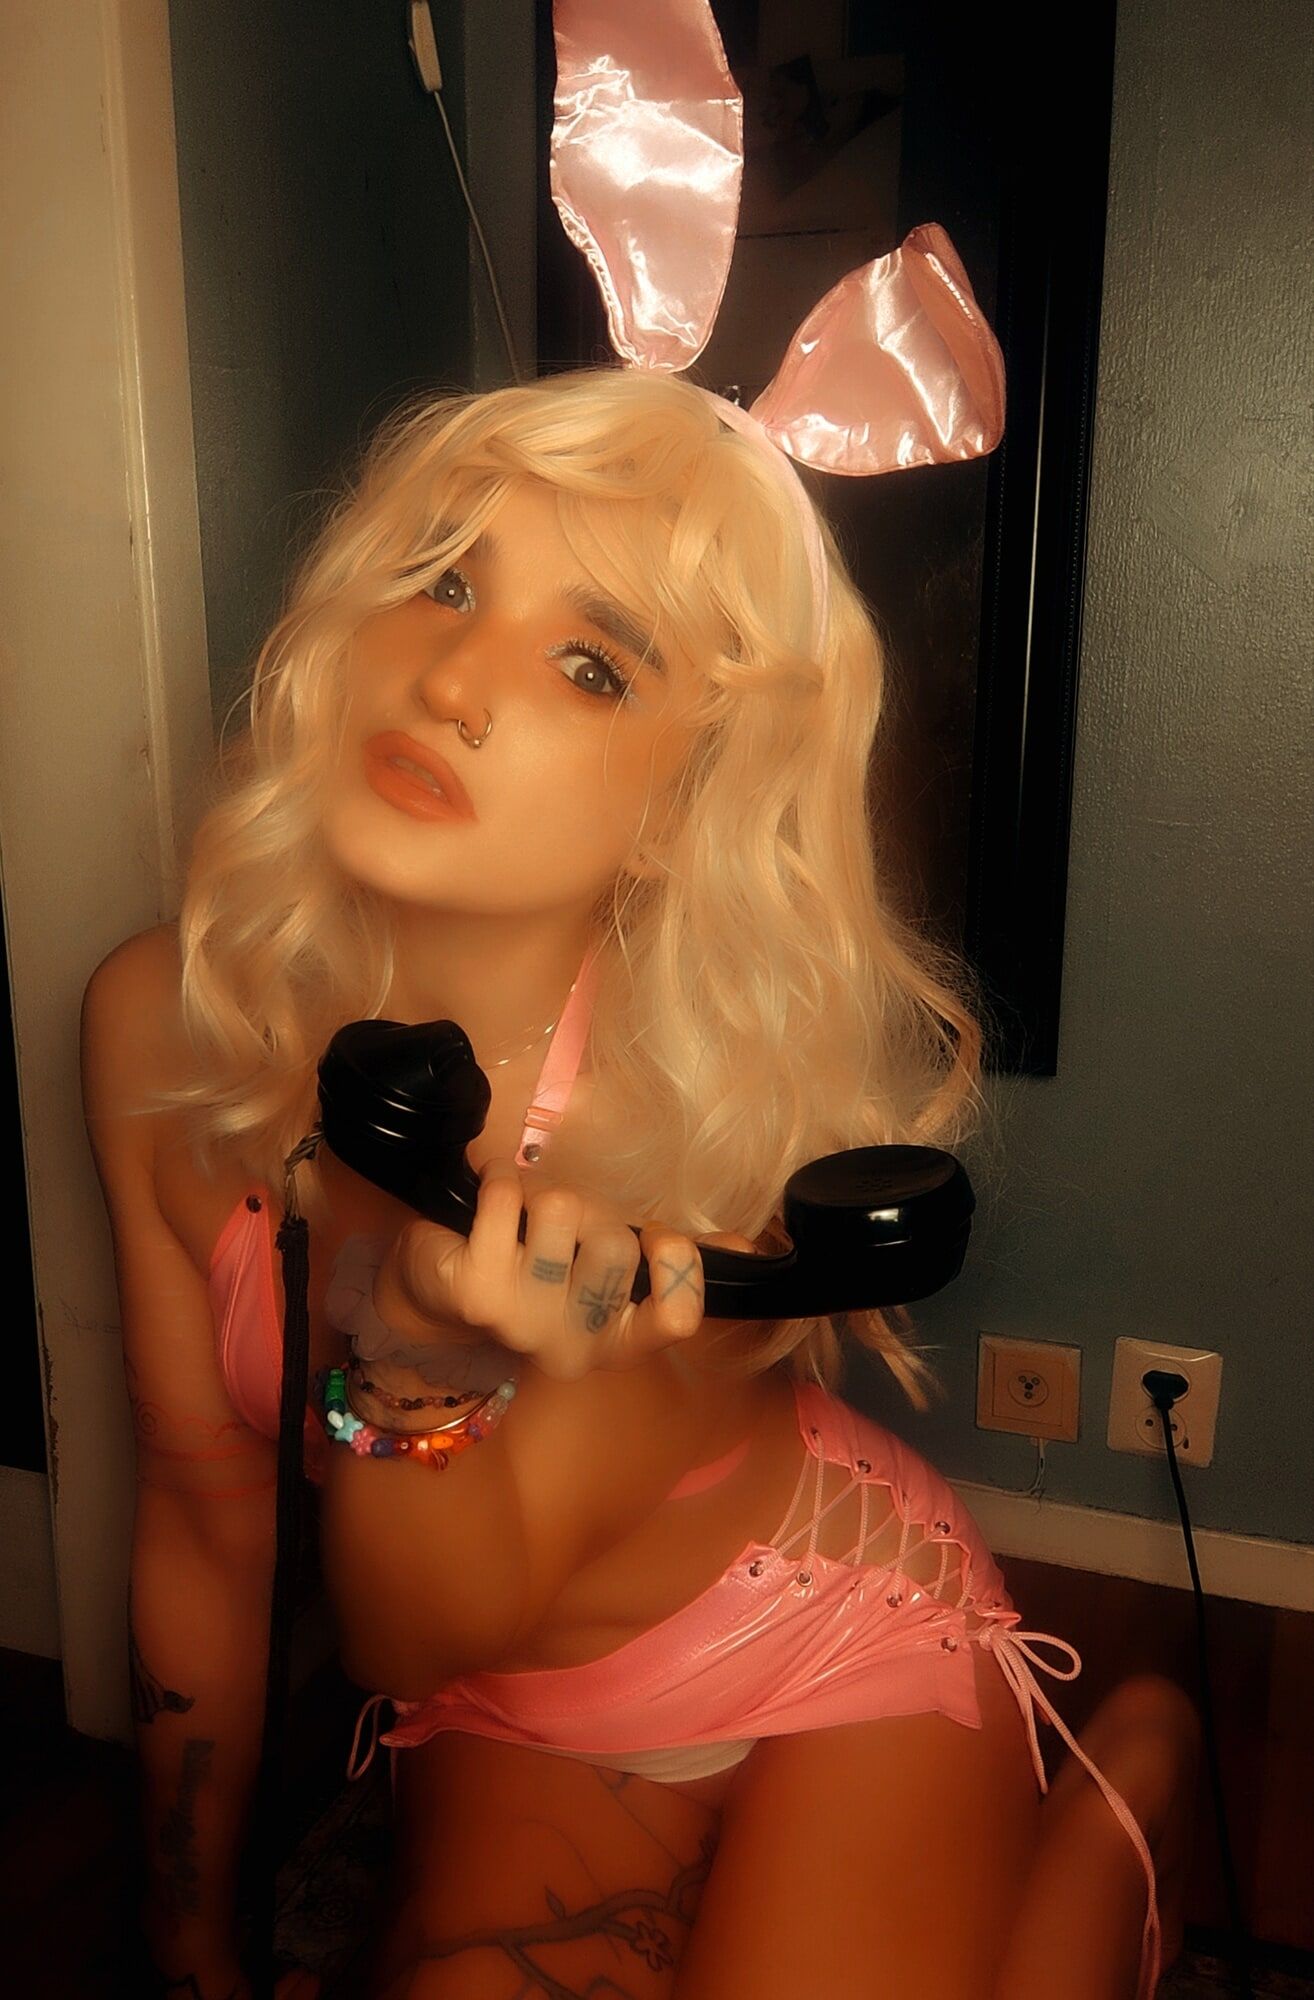 Pink bunny talking on the phone while showing off pussy #54